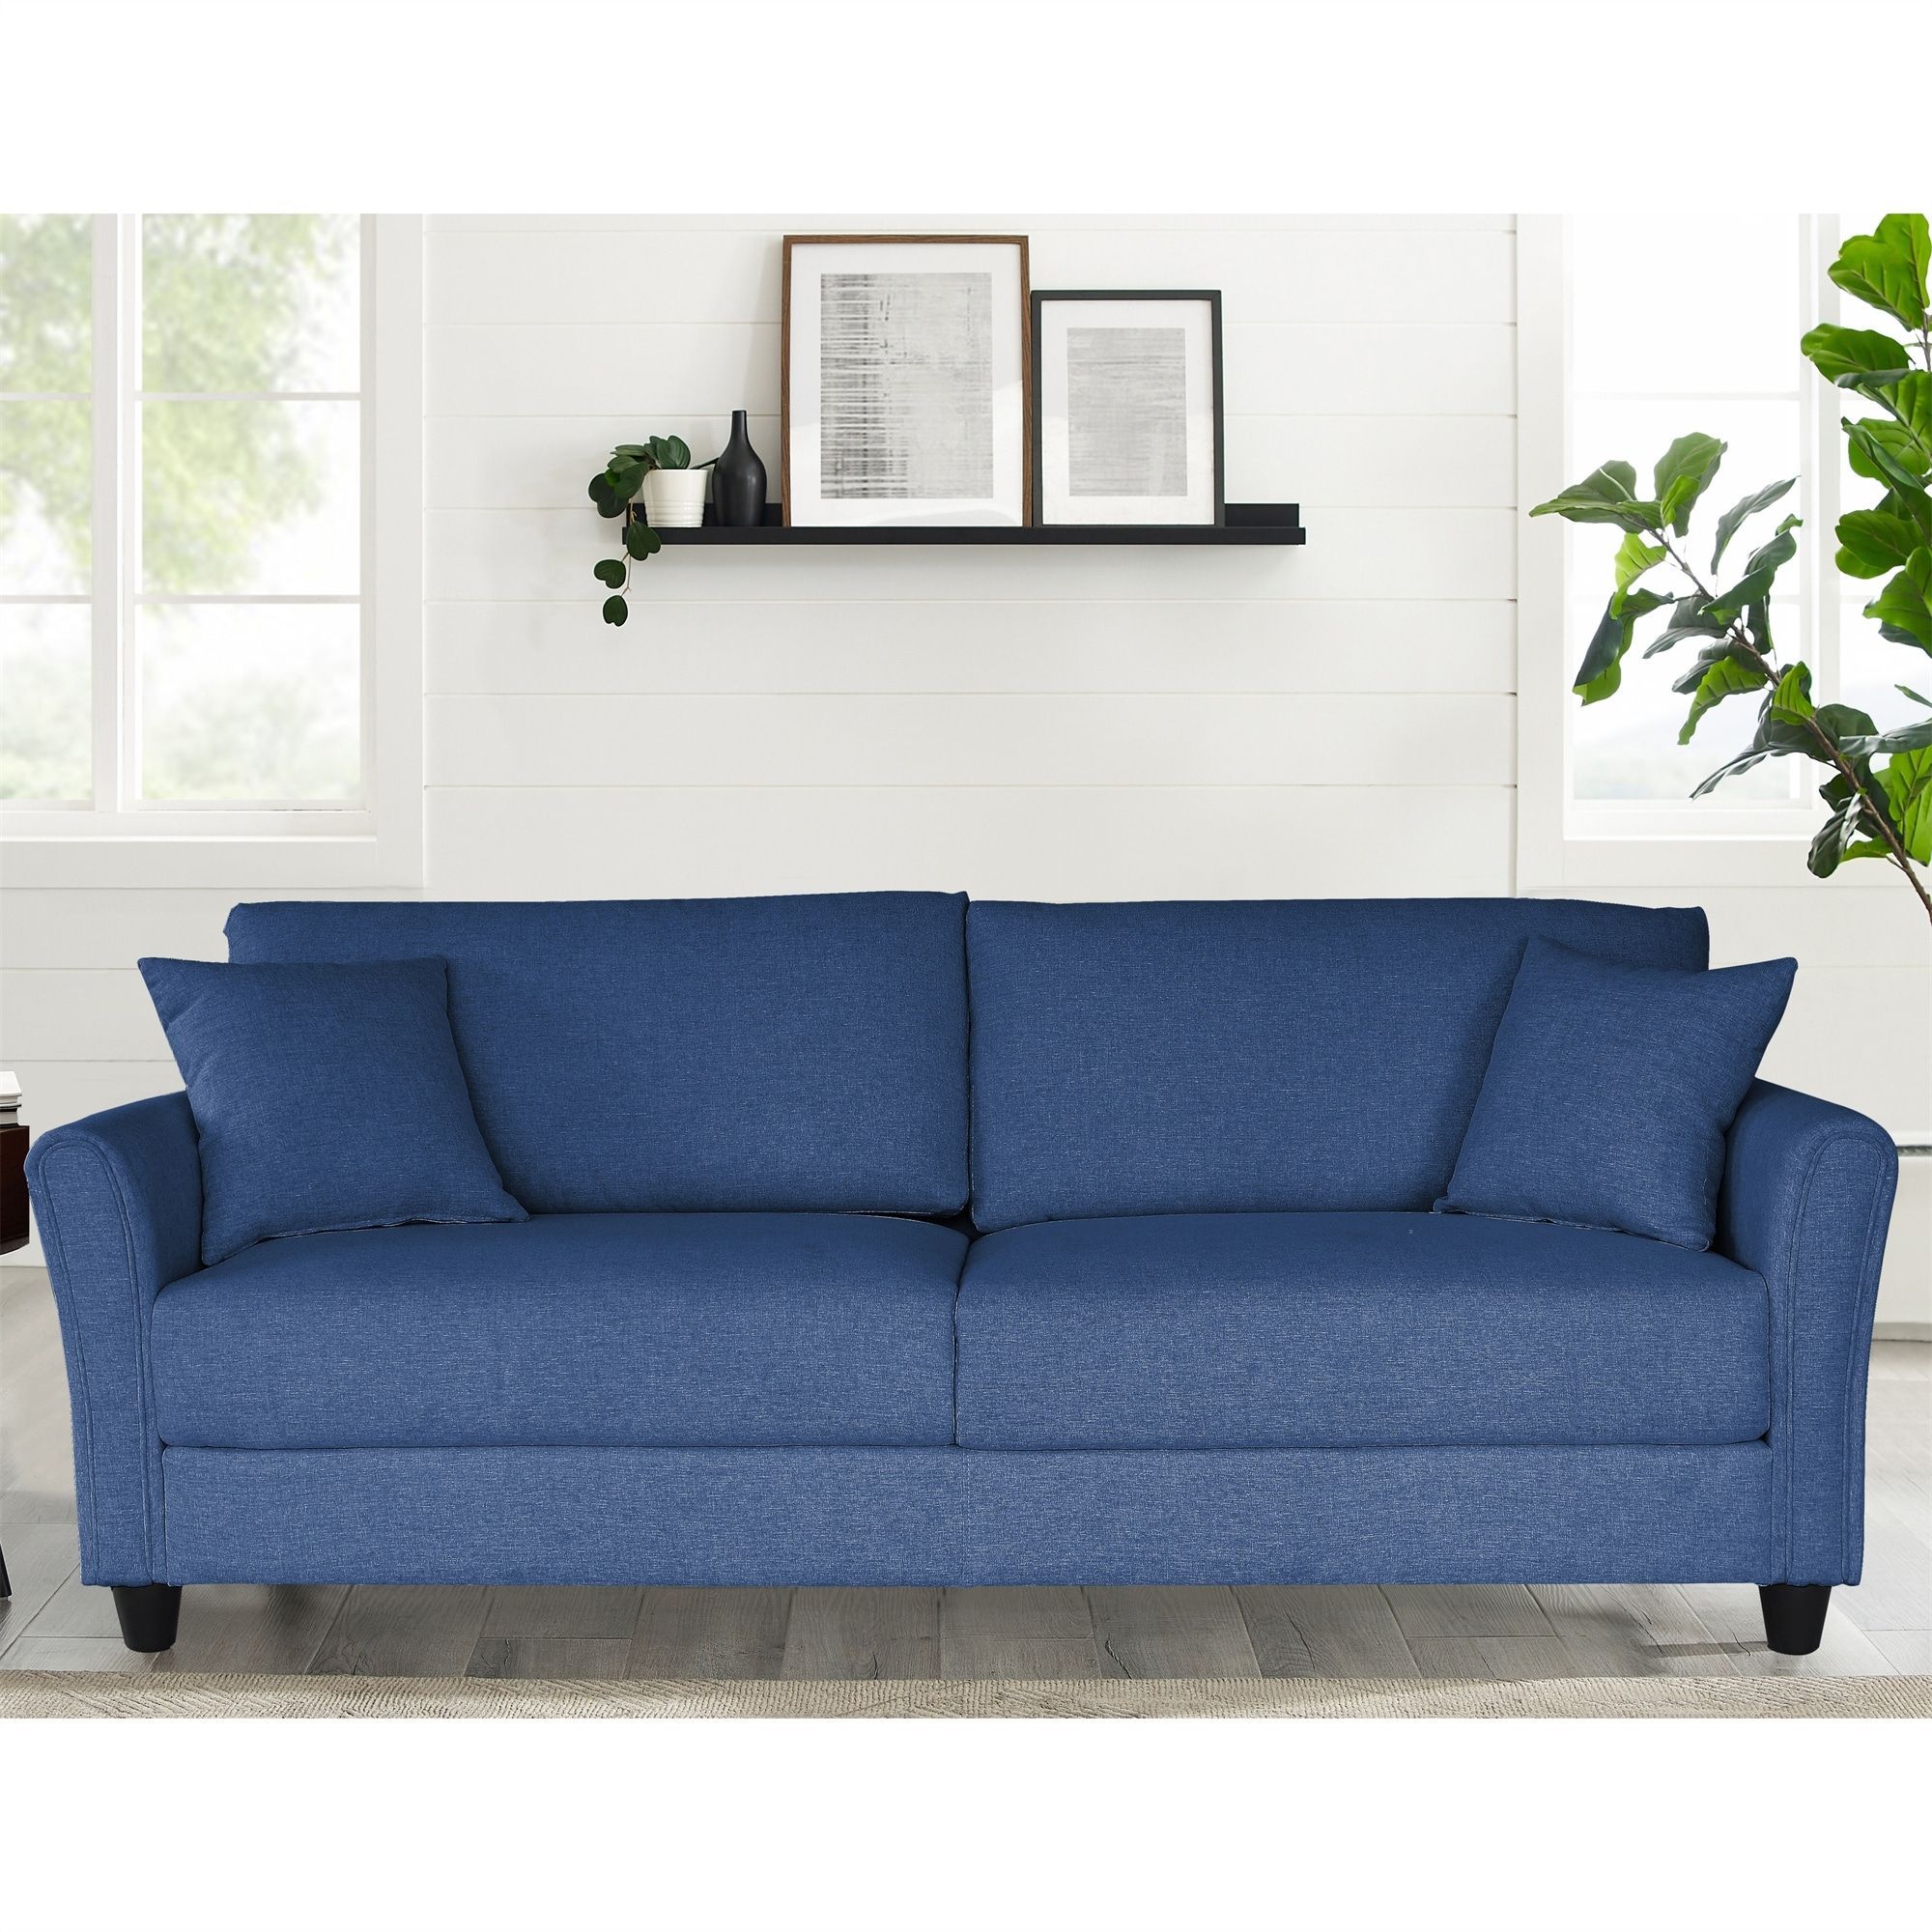 Blue Linen Three Seat Sofa – Bed Bath & Beyond – 36602793 Intended For Modern Blue Linen Sofas (View 3 of 15)